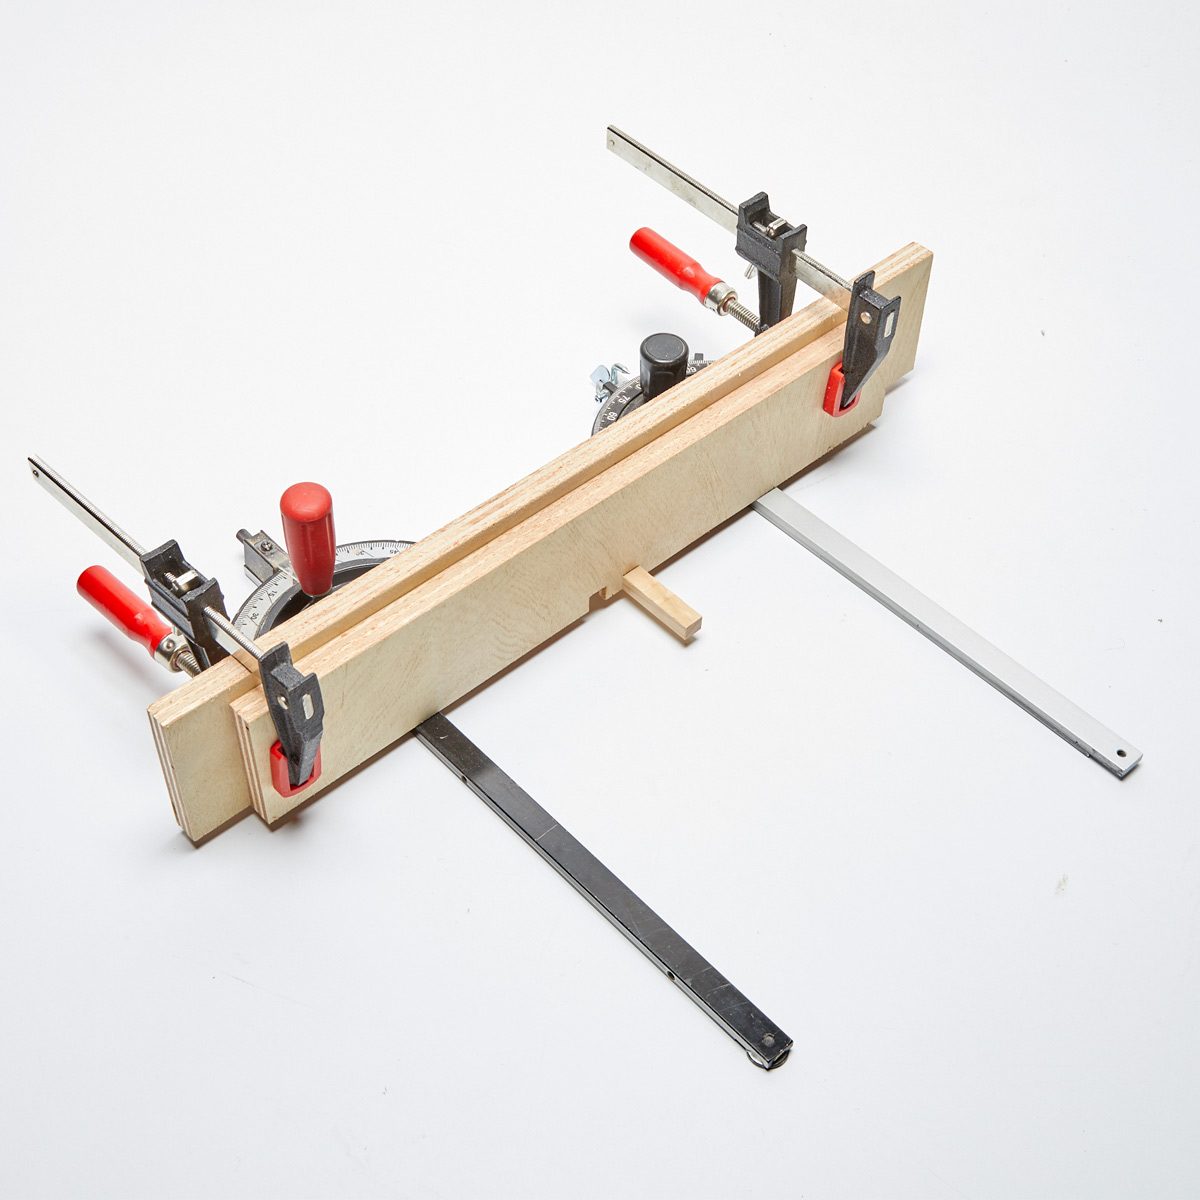 How To Make A Box Joint Jig With Pictures Diy Family Handyman